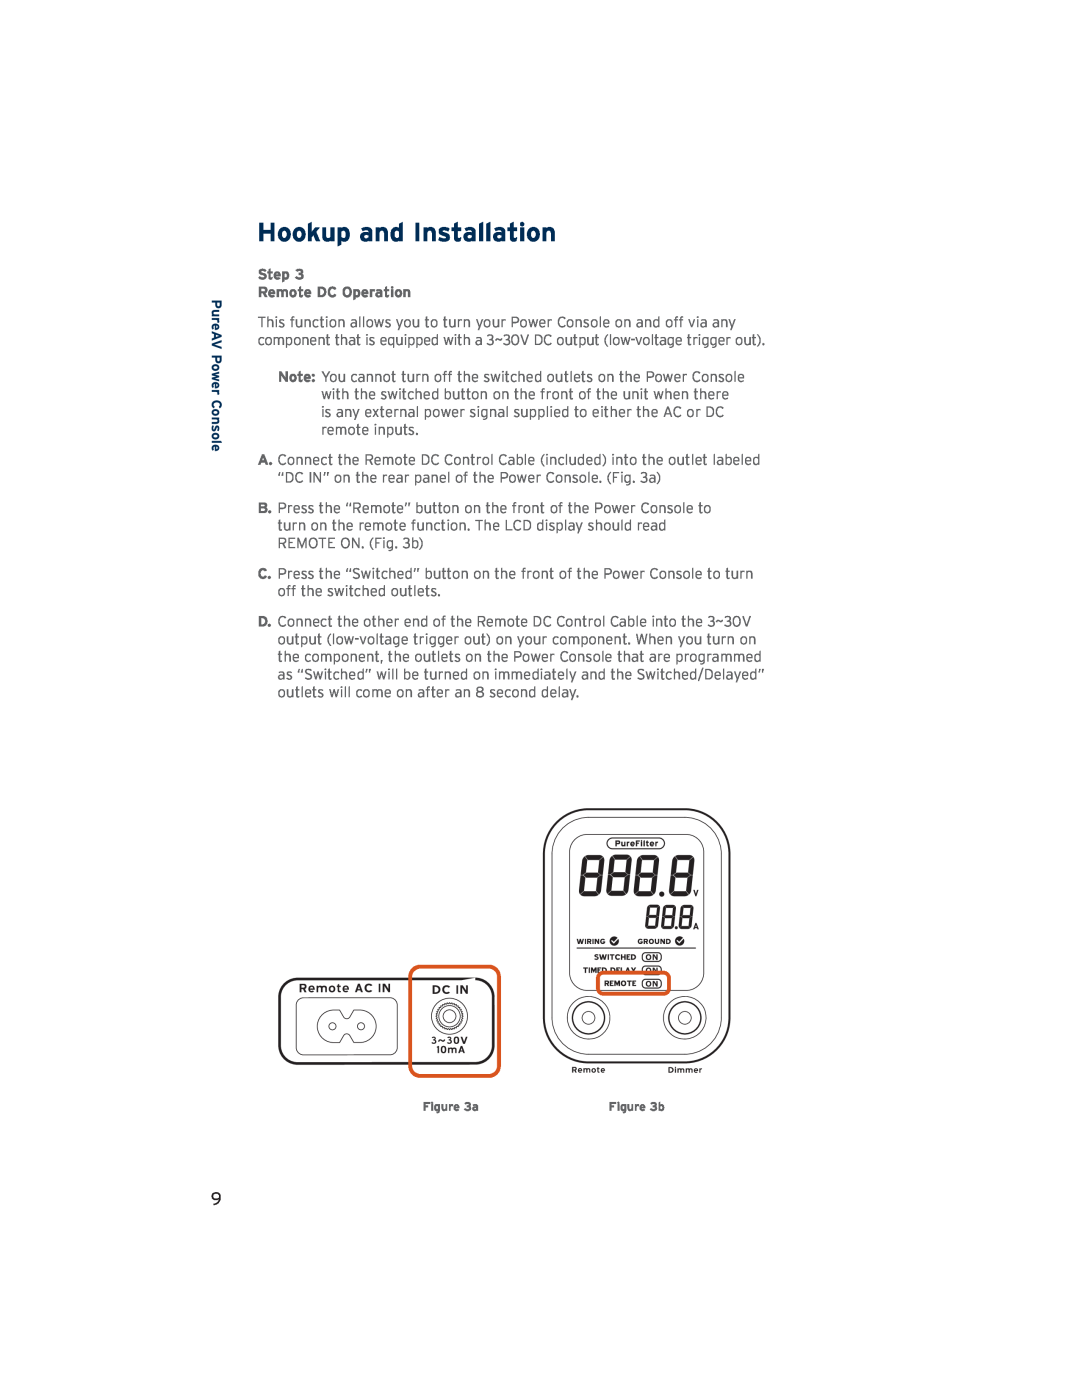 Belkin AP21300-12 user manual Step Remote DC Operation, Hookup and Installation, PureAV Power Console 